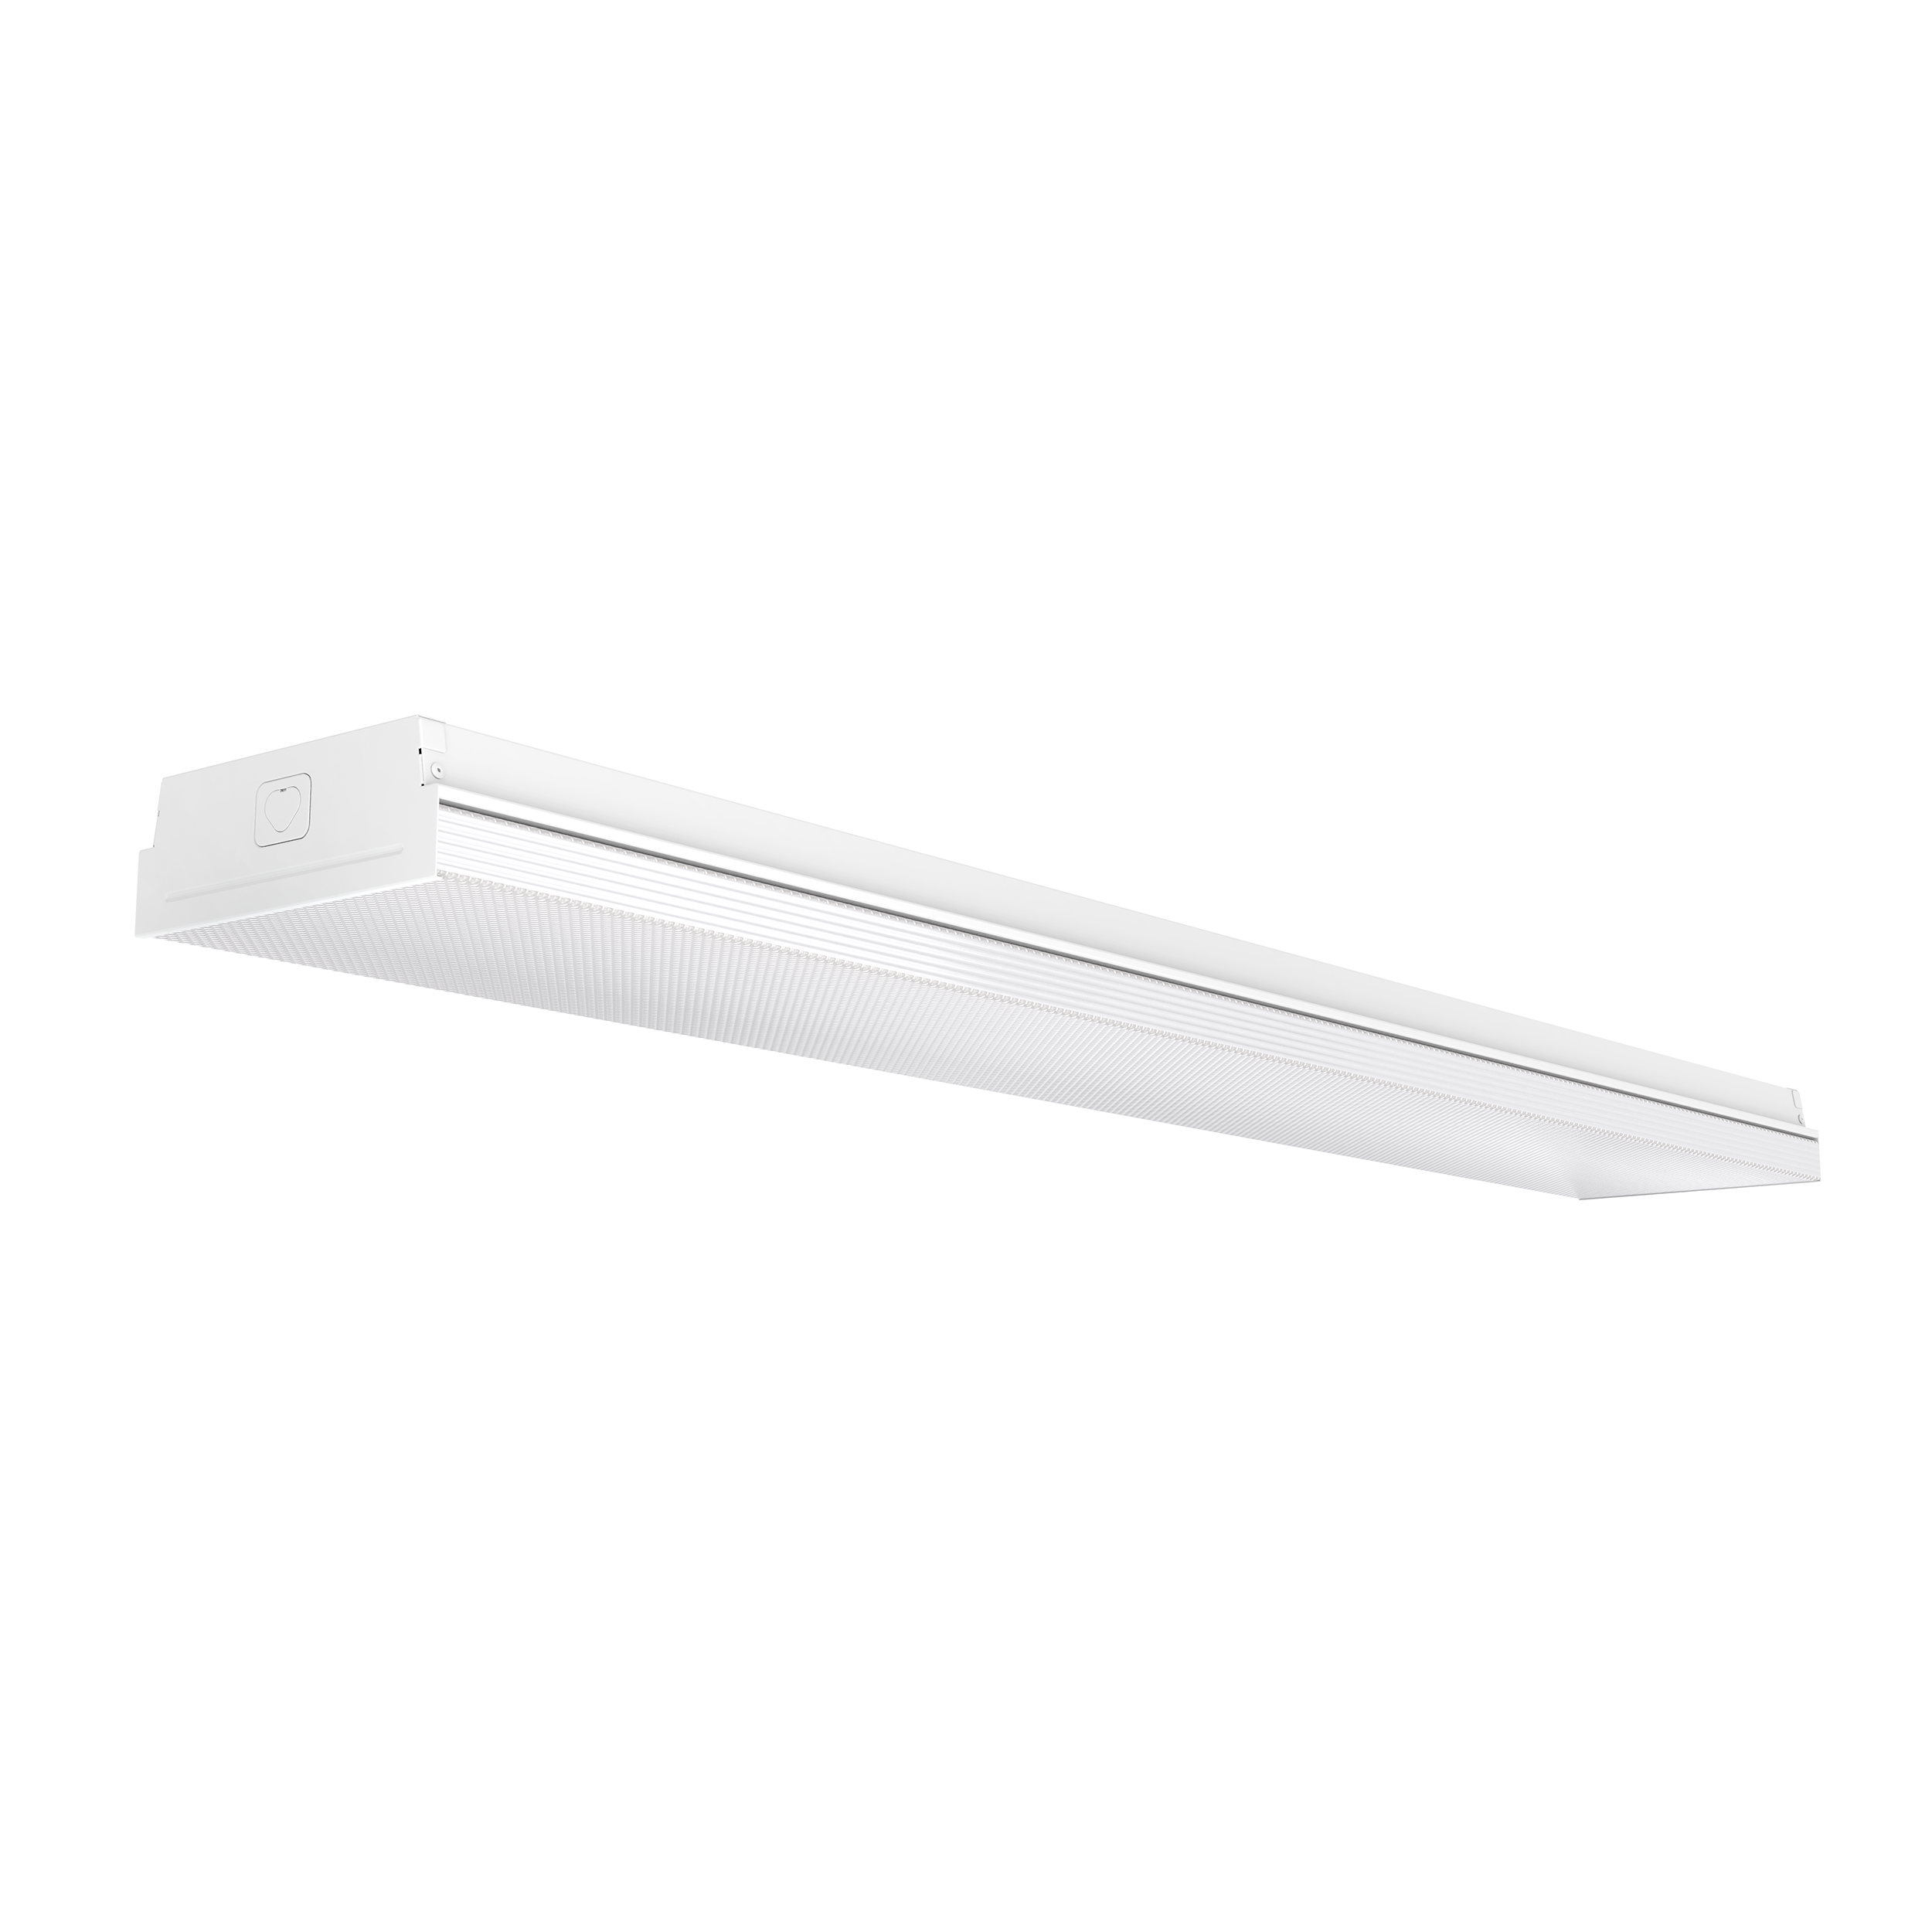 The 7-inch Prisma Wraparound LED Shop Light from Sunco Lighting is a direct mount light fixture with an integrated prismatic lens cover. The slim profile of this light blends into your ceiling for a streamlined look. Easy to install with its direct wire, flush mount installation and included mounting hardware, this fixture provides instant on, bright (6500lm) light in your warehouse, office, hallway, hospital lobby, and other commercial applications.